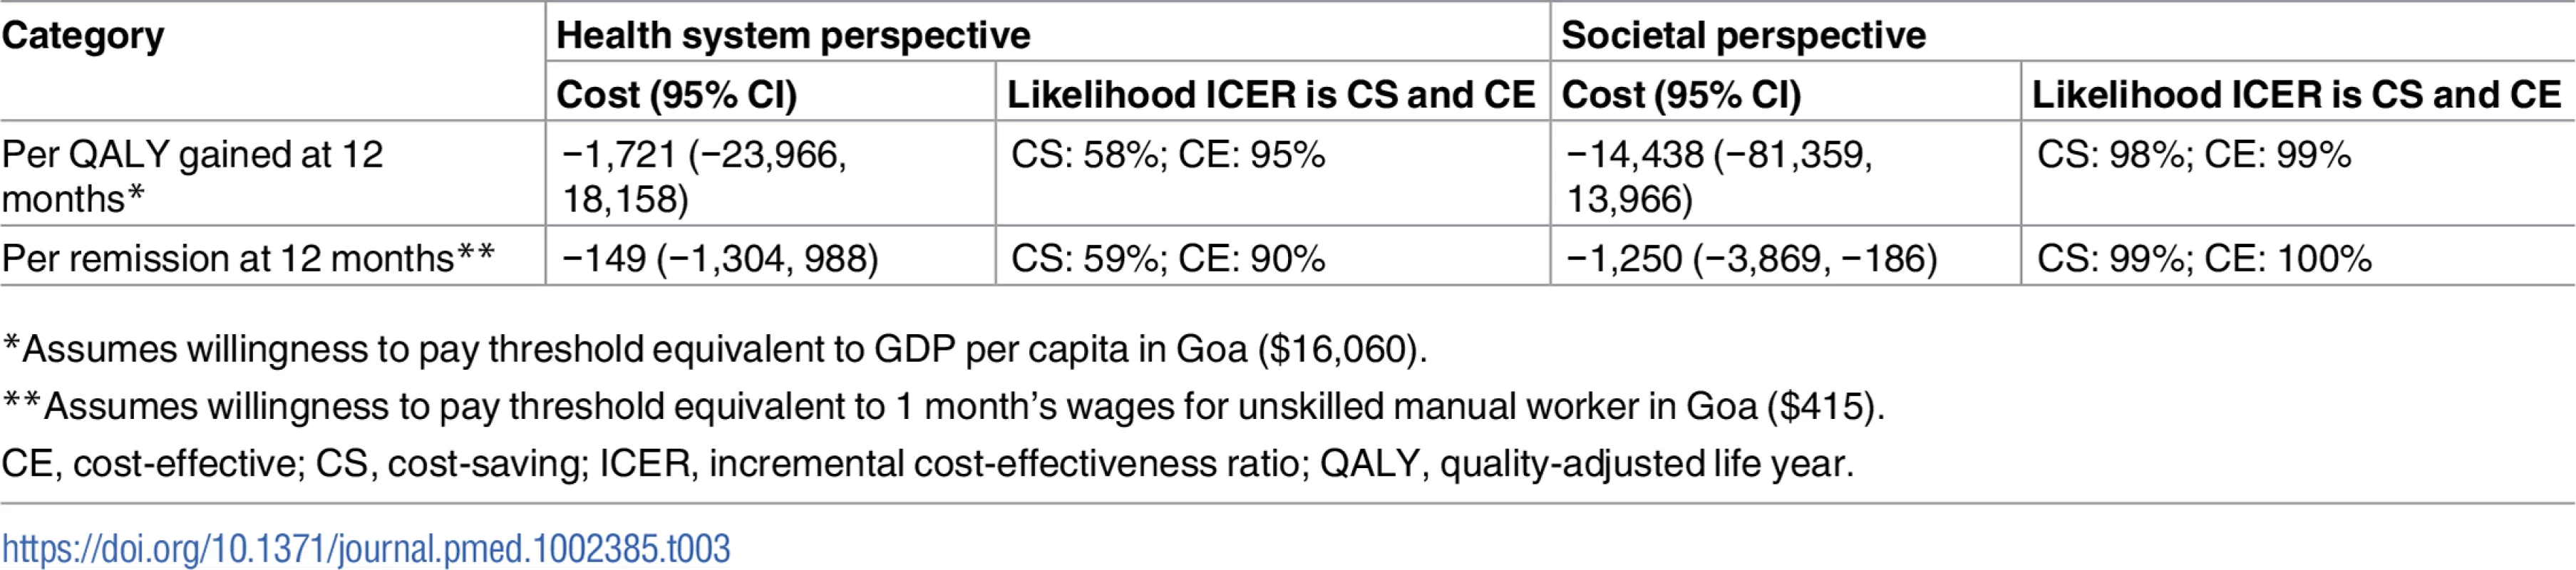 Cost-effectiveness analyses from health system and societal perspectives (costs in 2015 international dollars).